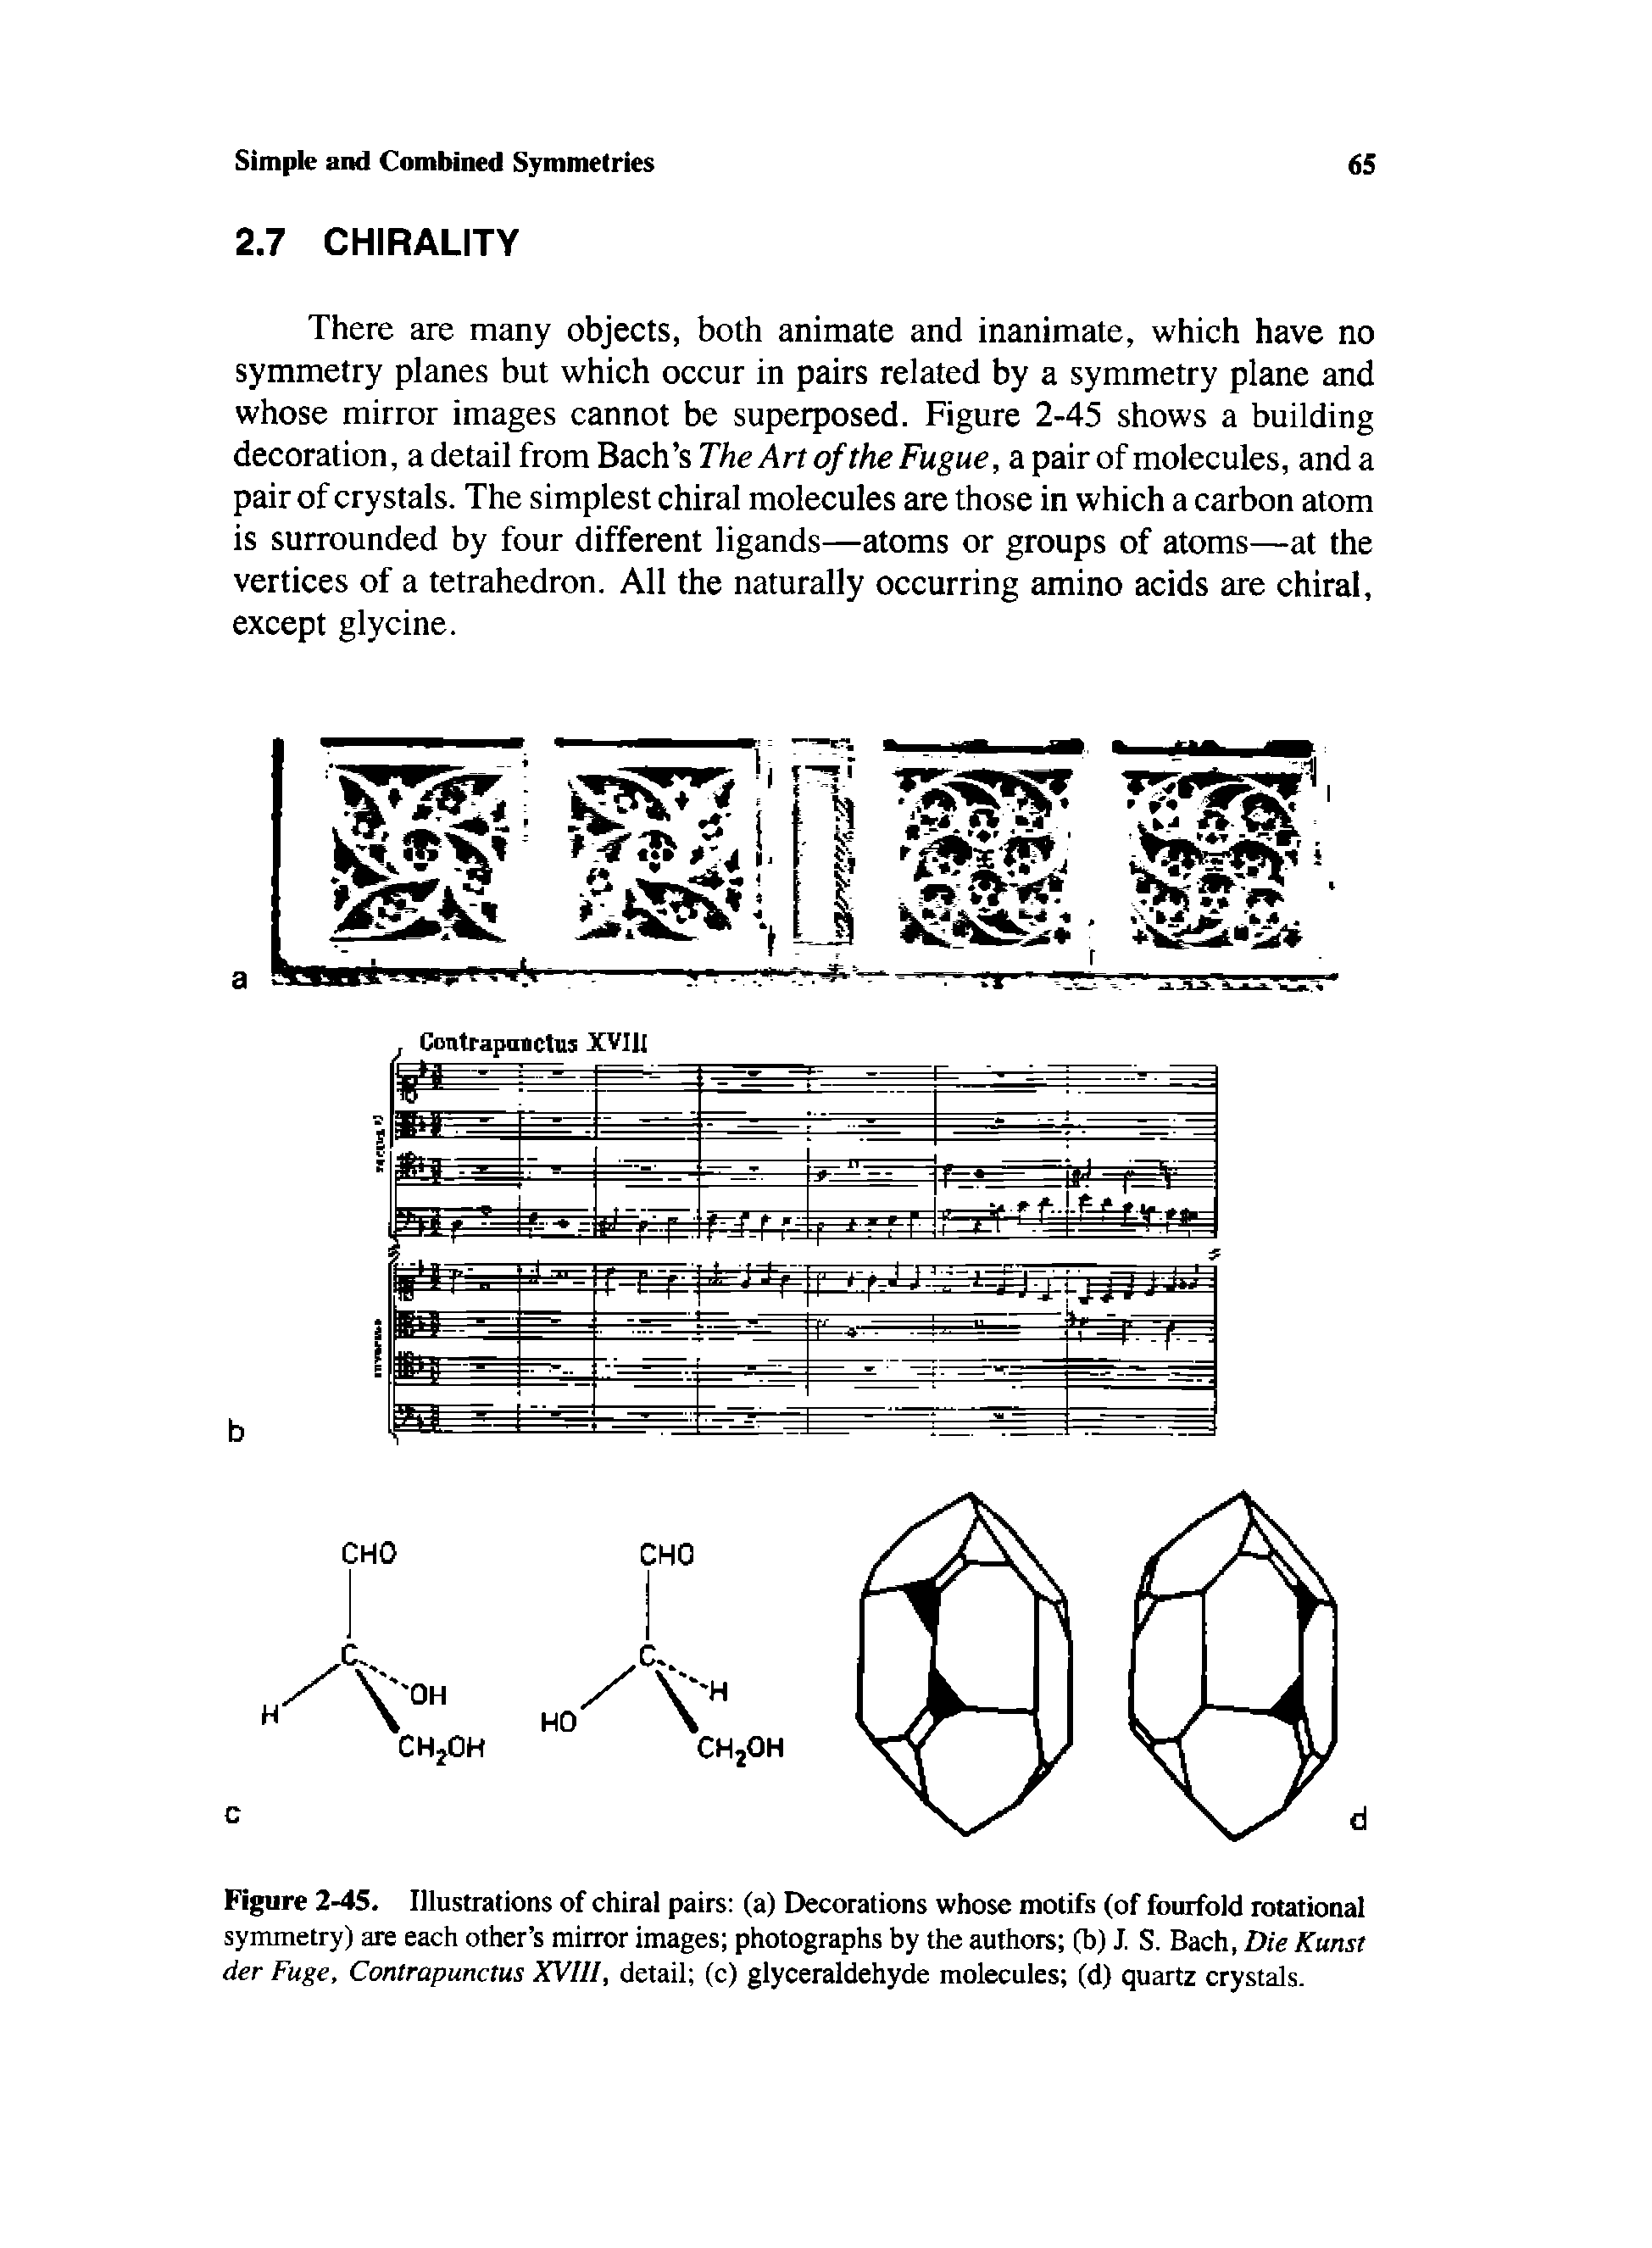 Figure 2-45. Illustrations of chiral pairs (a) Decorations whose motifs (of fourfold rotational...